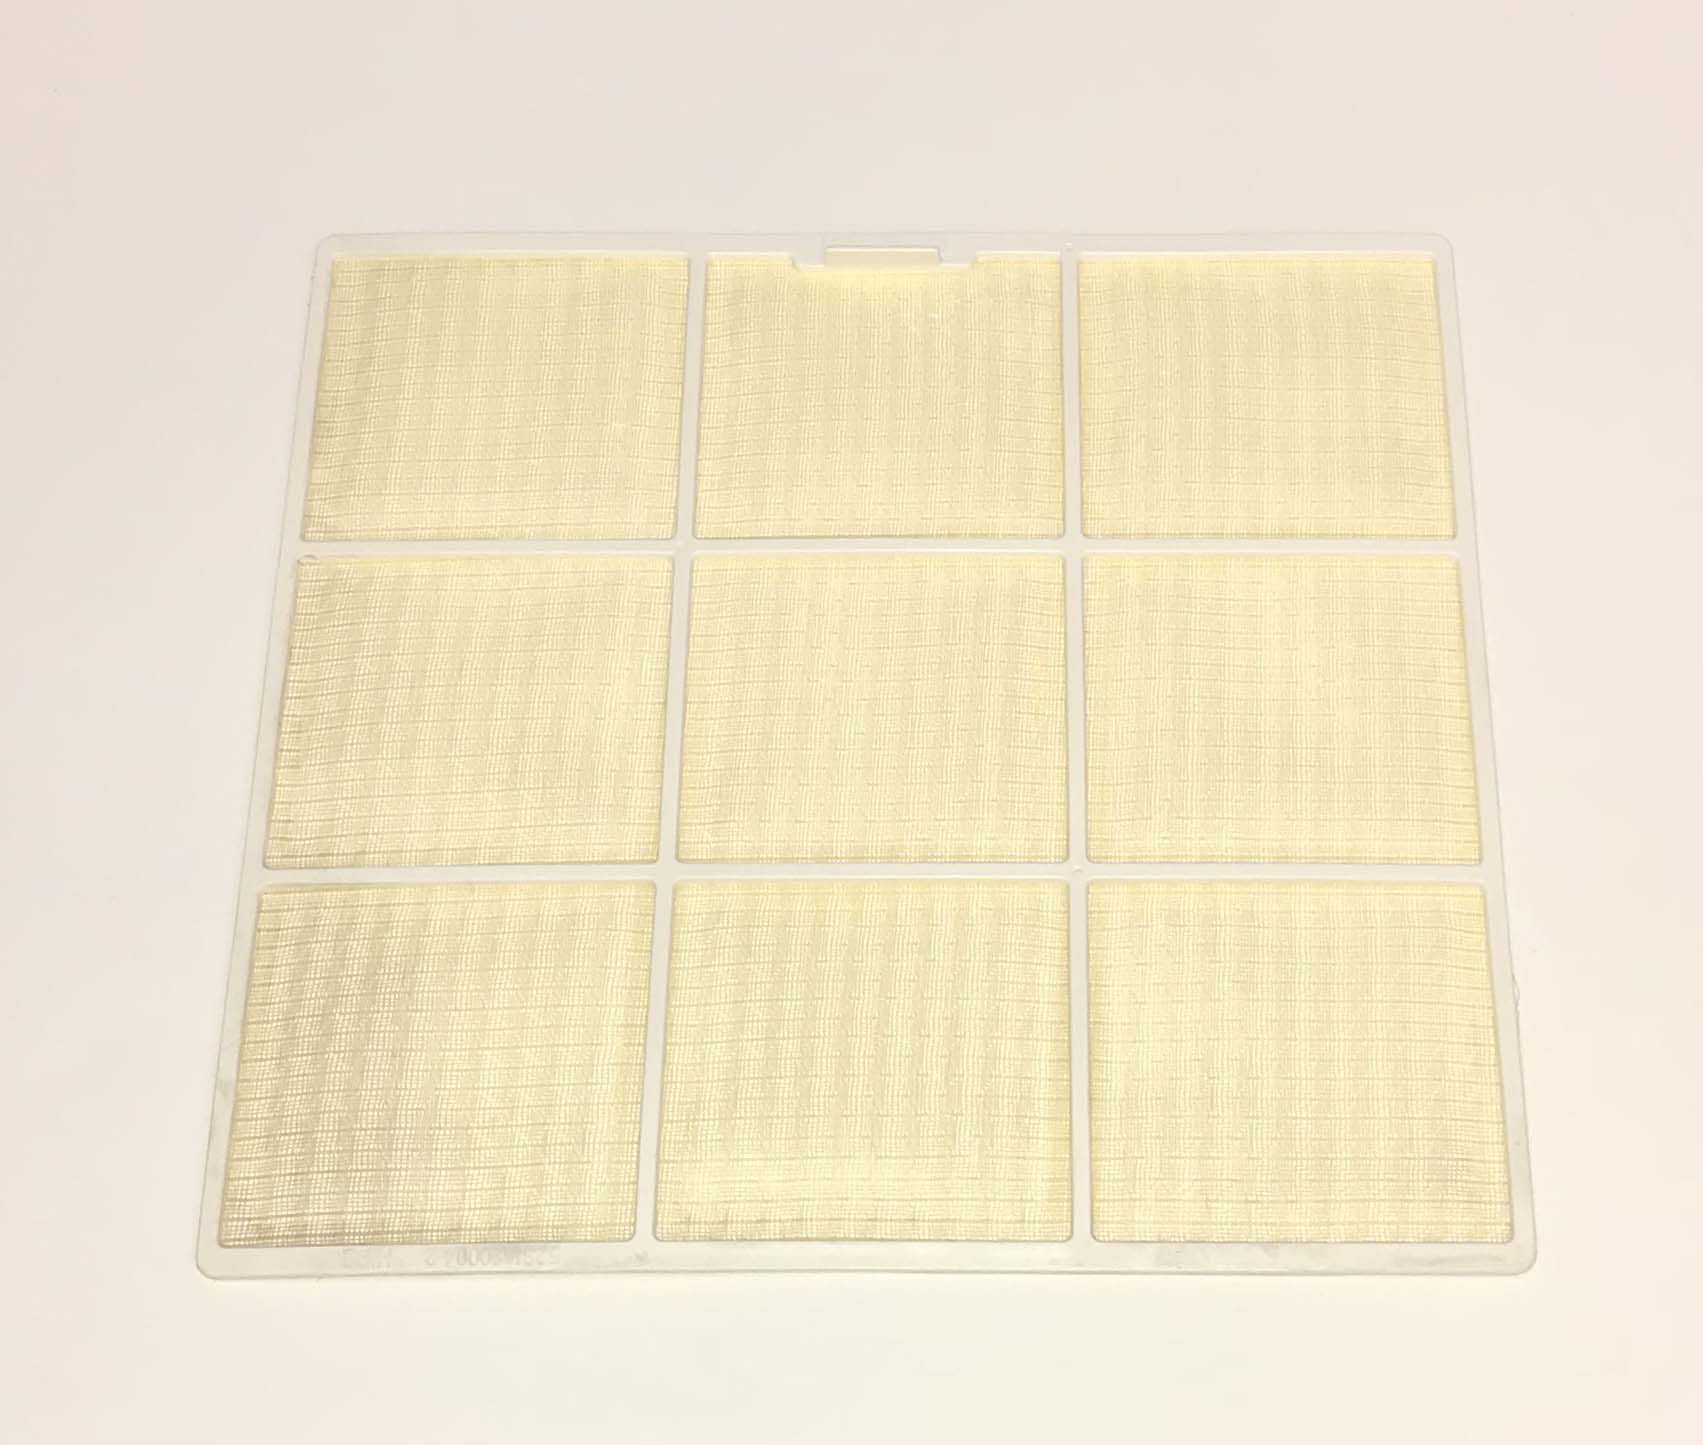 Panasonic NEW OEM Panasonic AC Air Conditioner Filter Specifically For CWXC83HU, CW-XC83HU